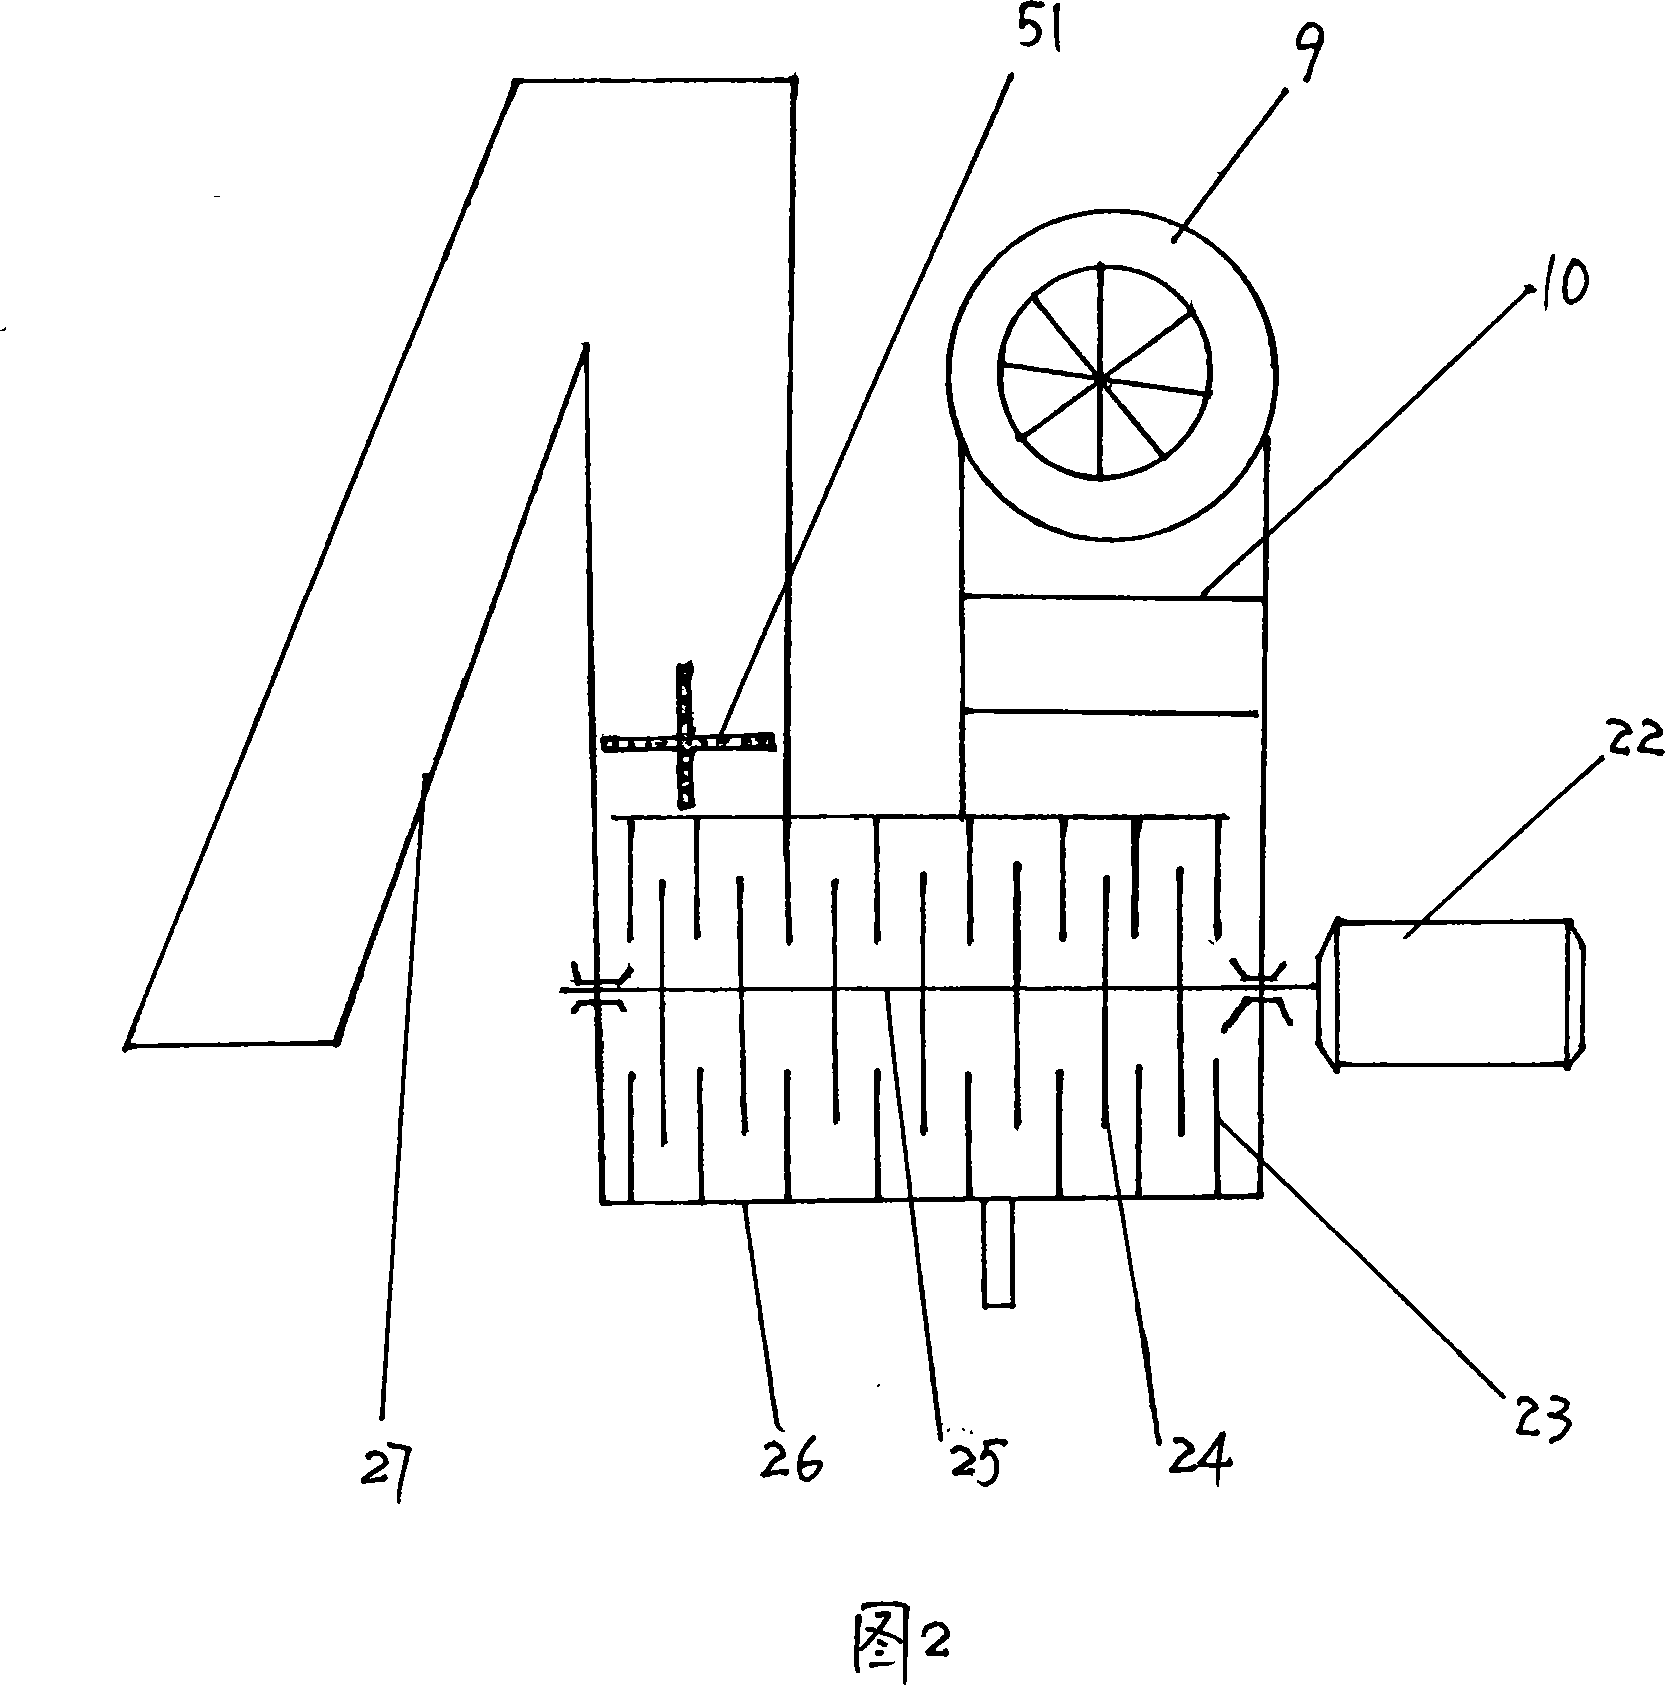 Industrial fume purifying apparatus